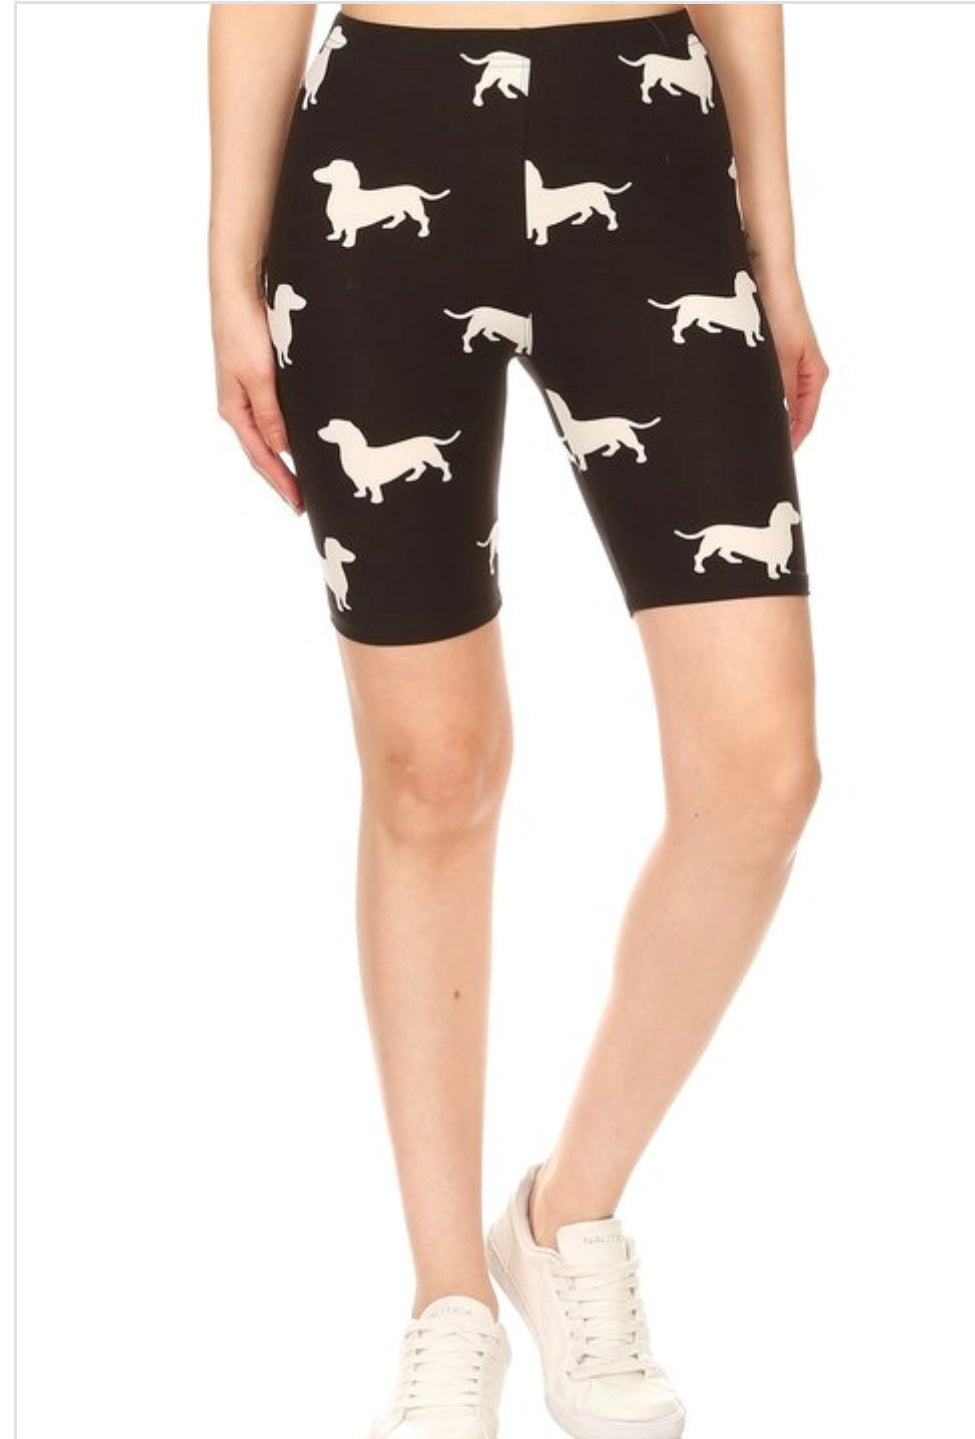 Womens Dachshund Dog Printed Biker Shorts Shorts MomMe and More 